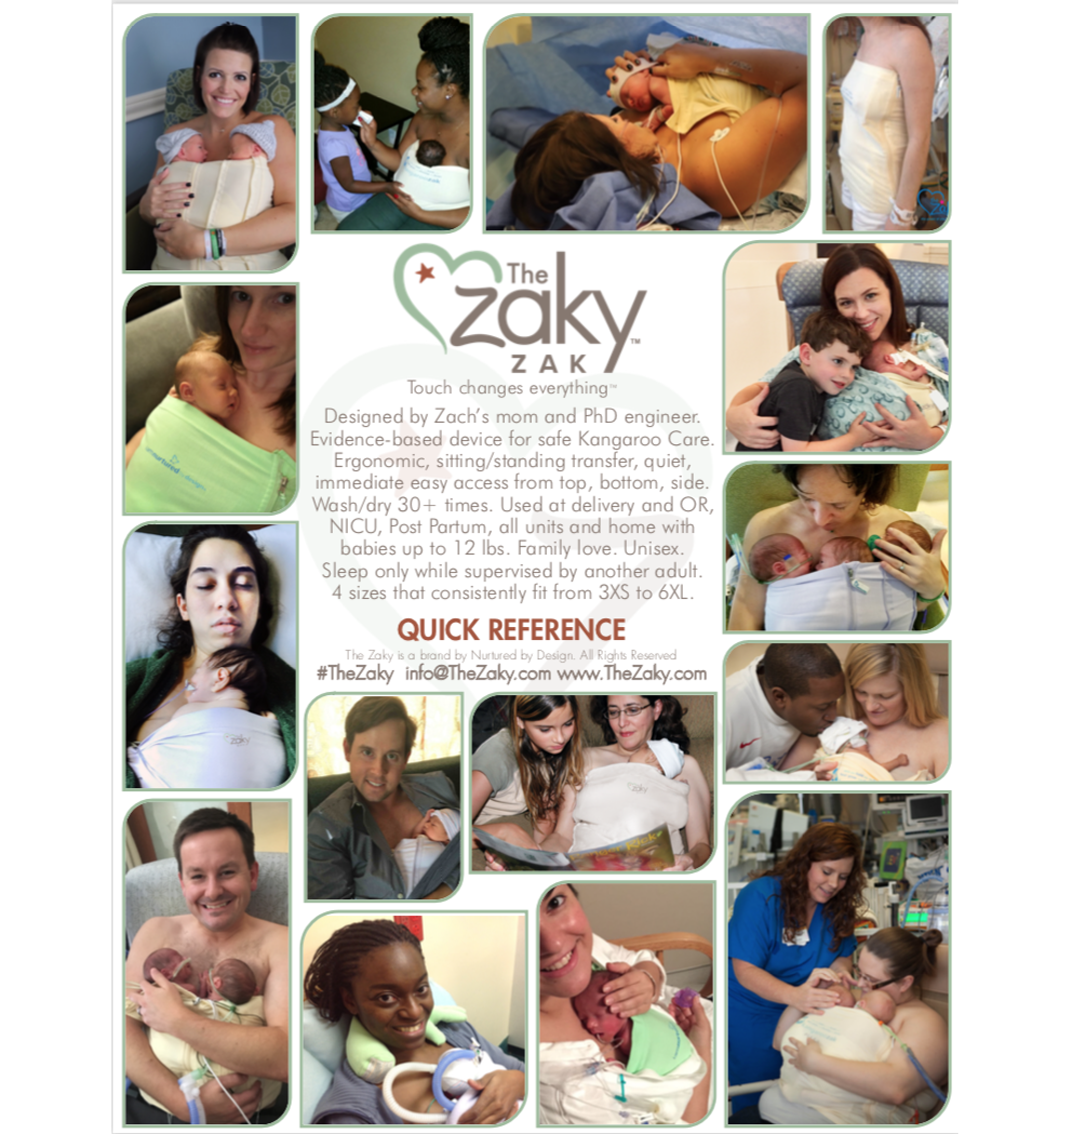 Fundraiser for Love for Lily:  The Zaky ZAK® for UCHealth